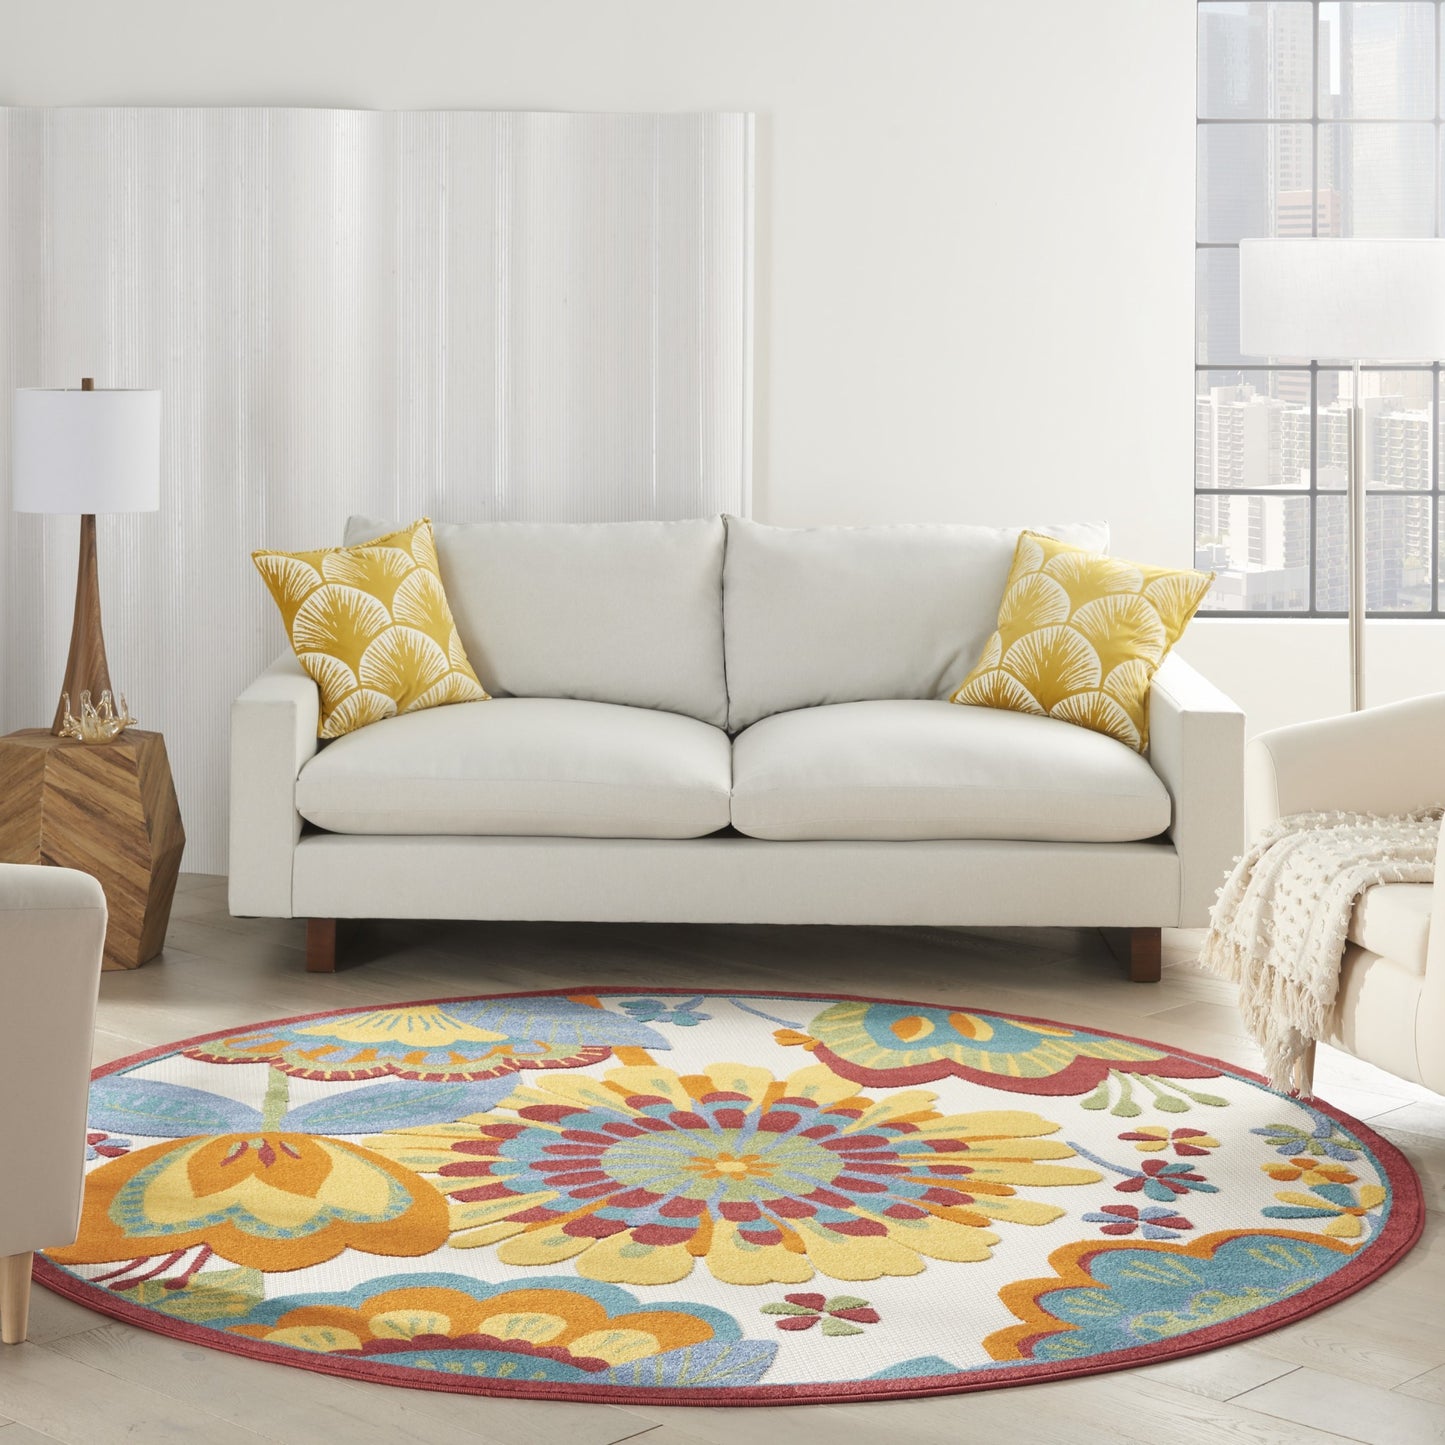 4' X 6' Yellow And Ivory Floral Indoor Outdoor Area Rug